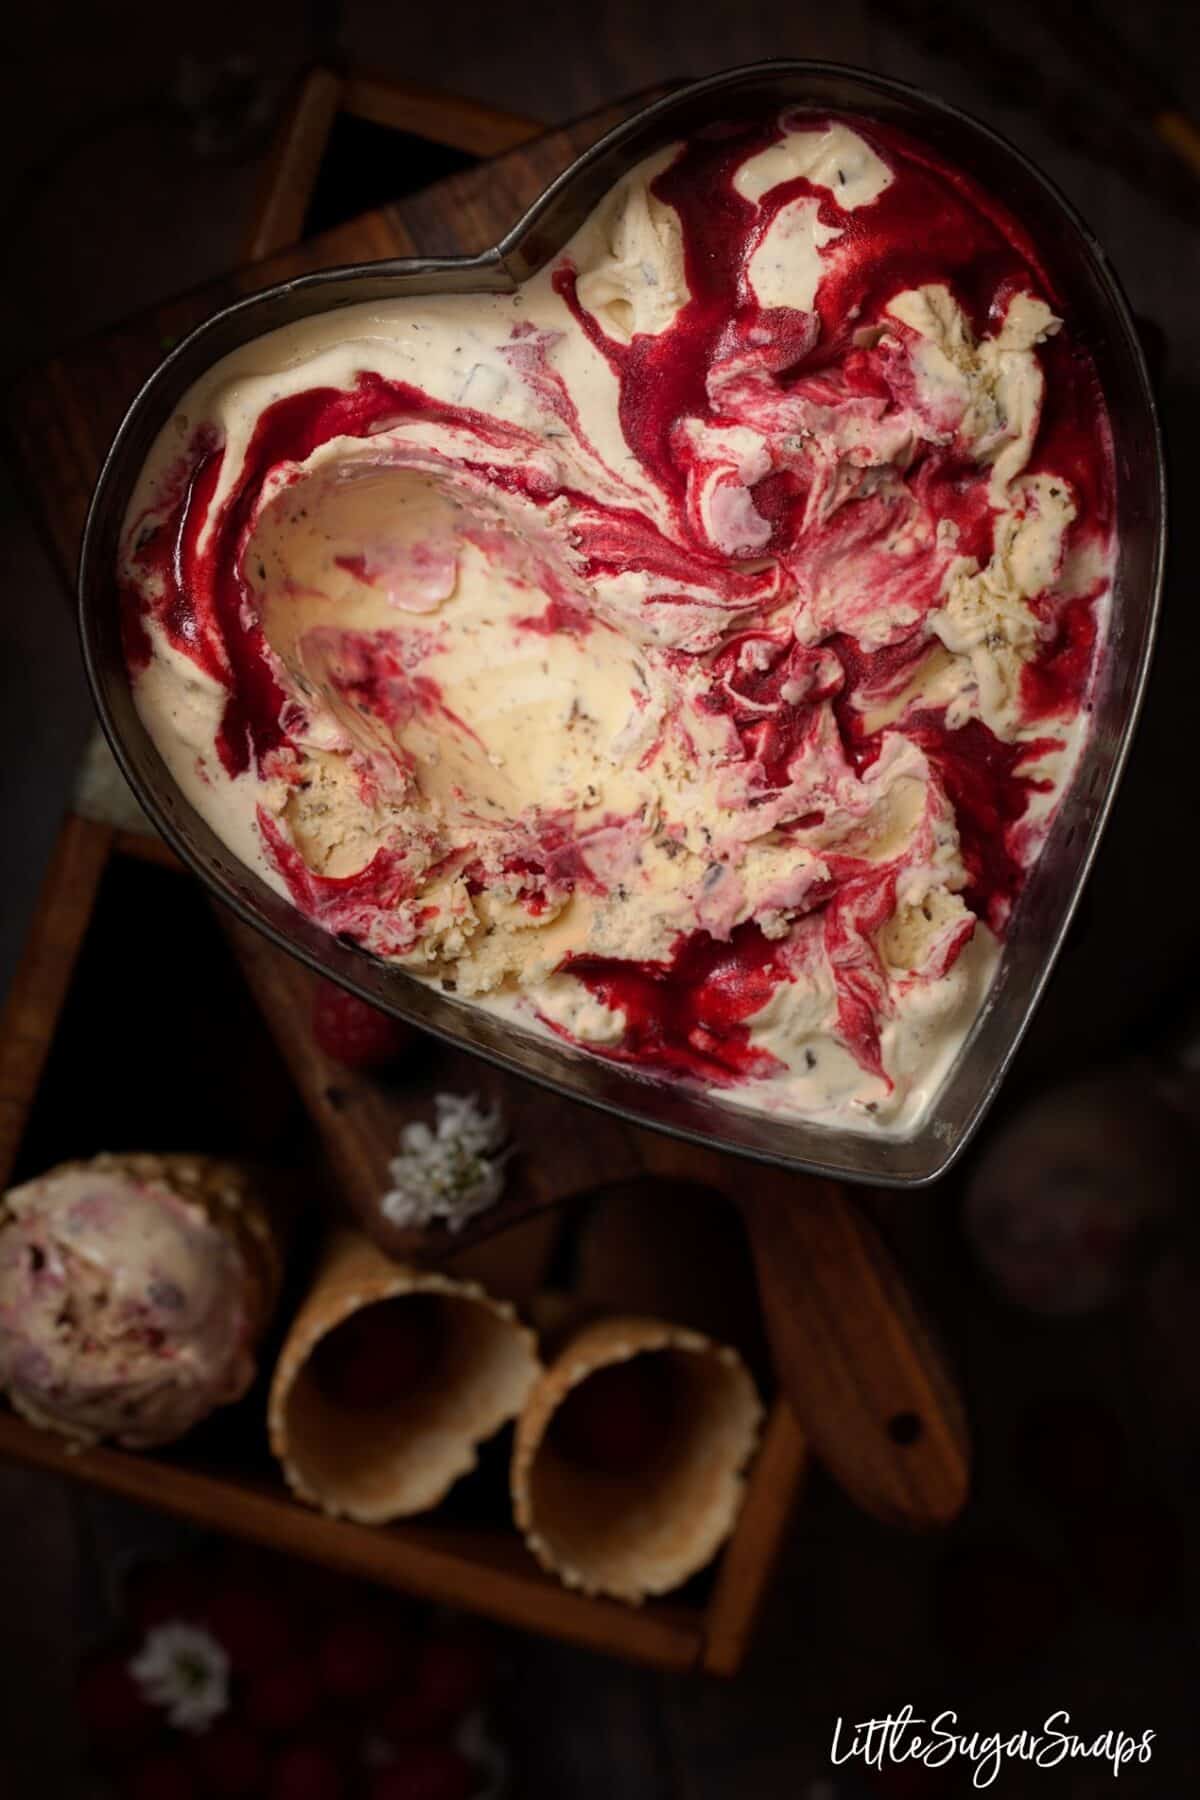 Malted Milk Ice Cream with chocolate chips and raspberry ripple in a heart shaped tin.